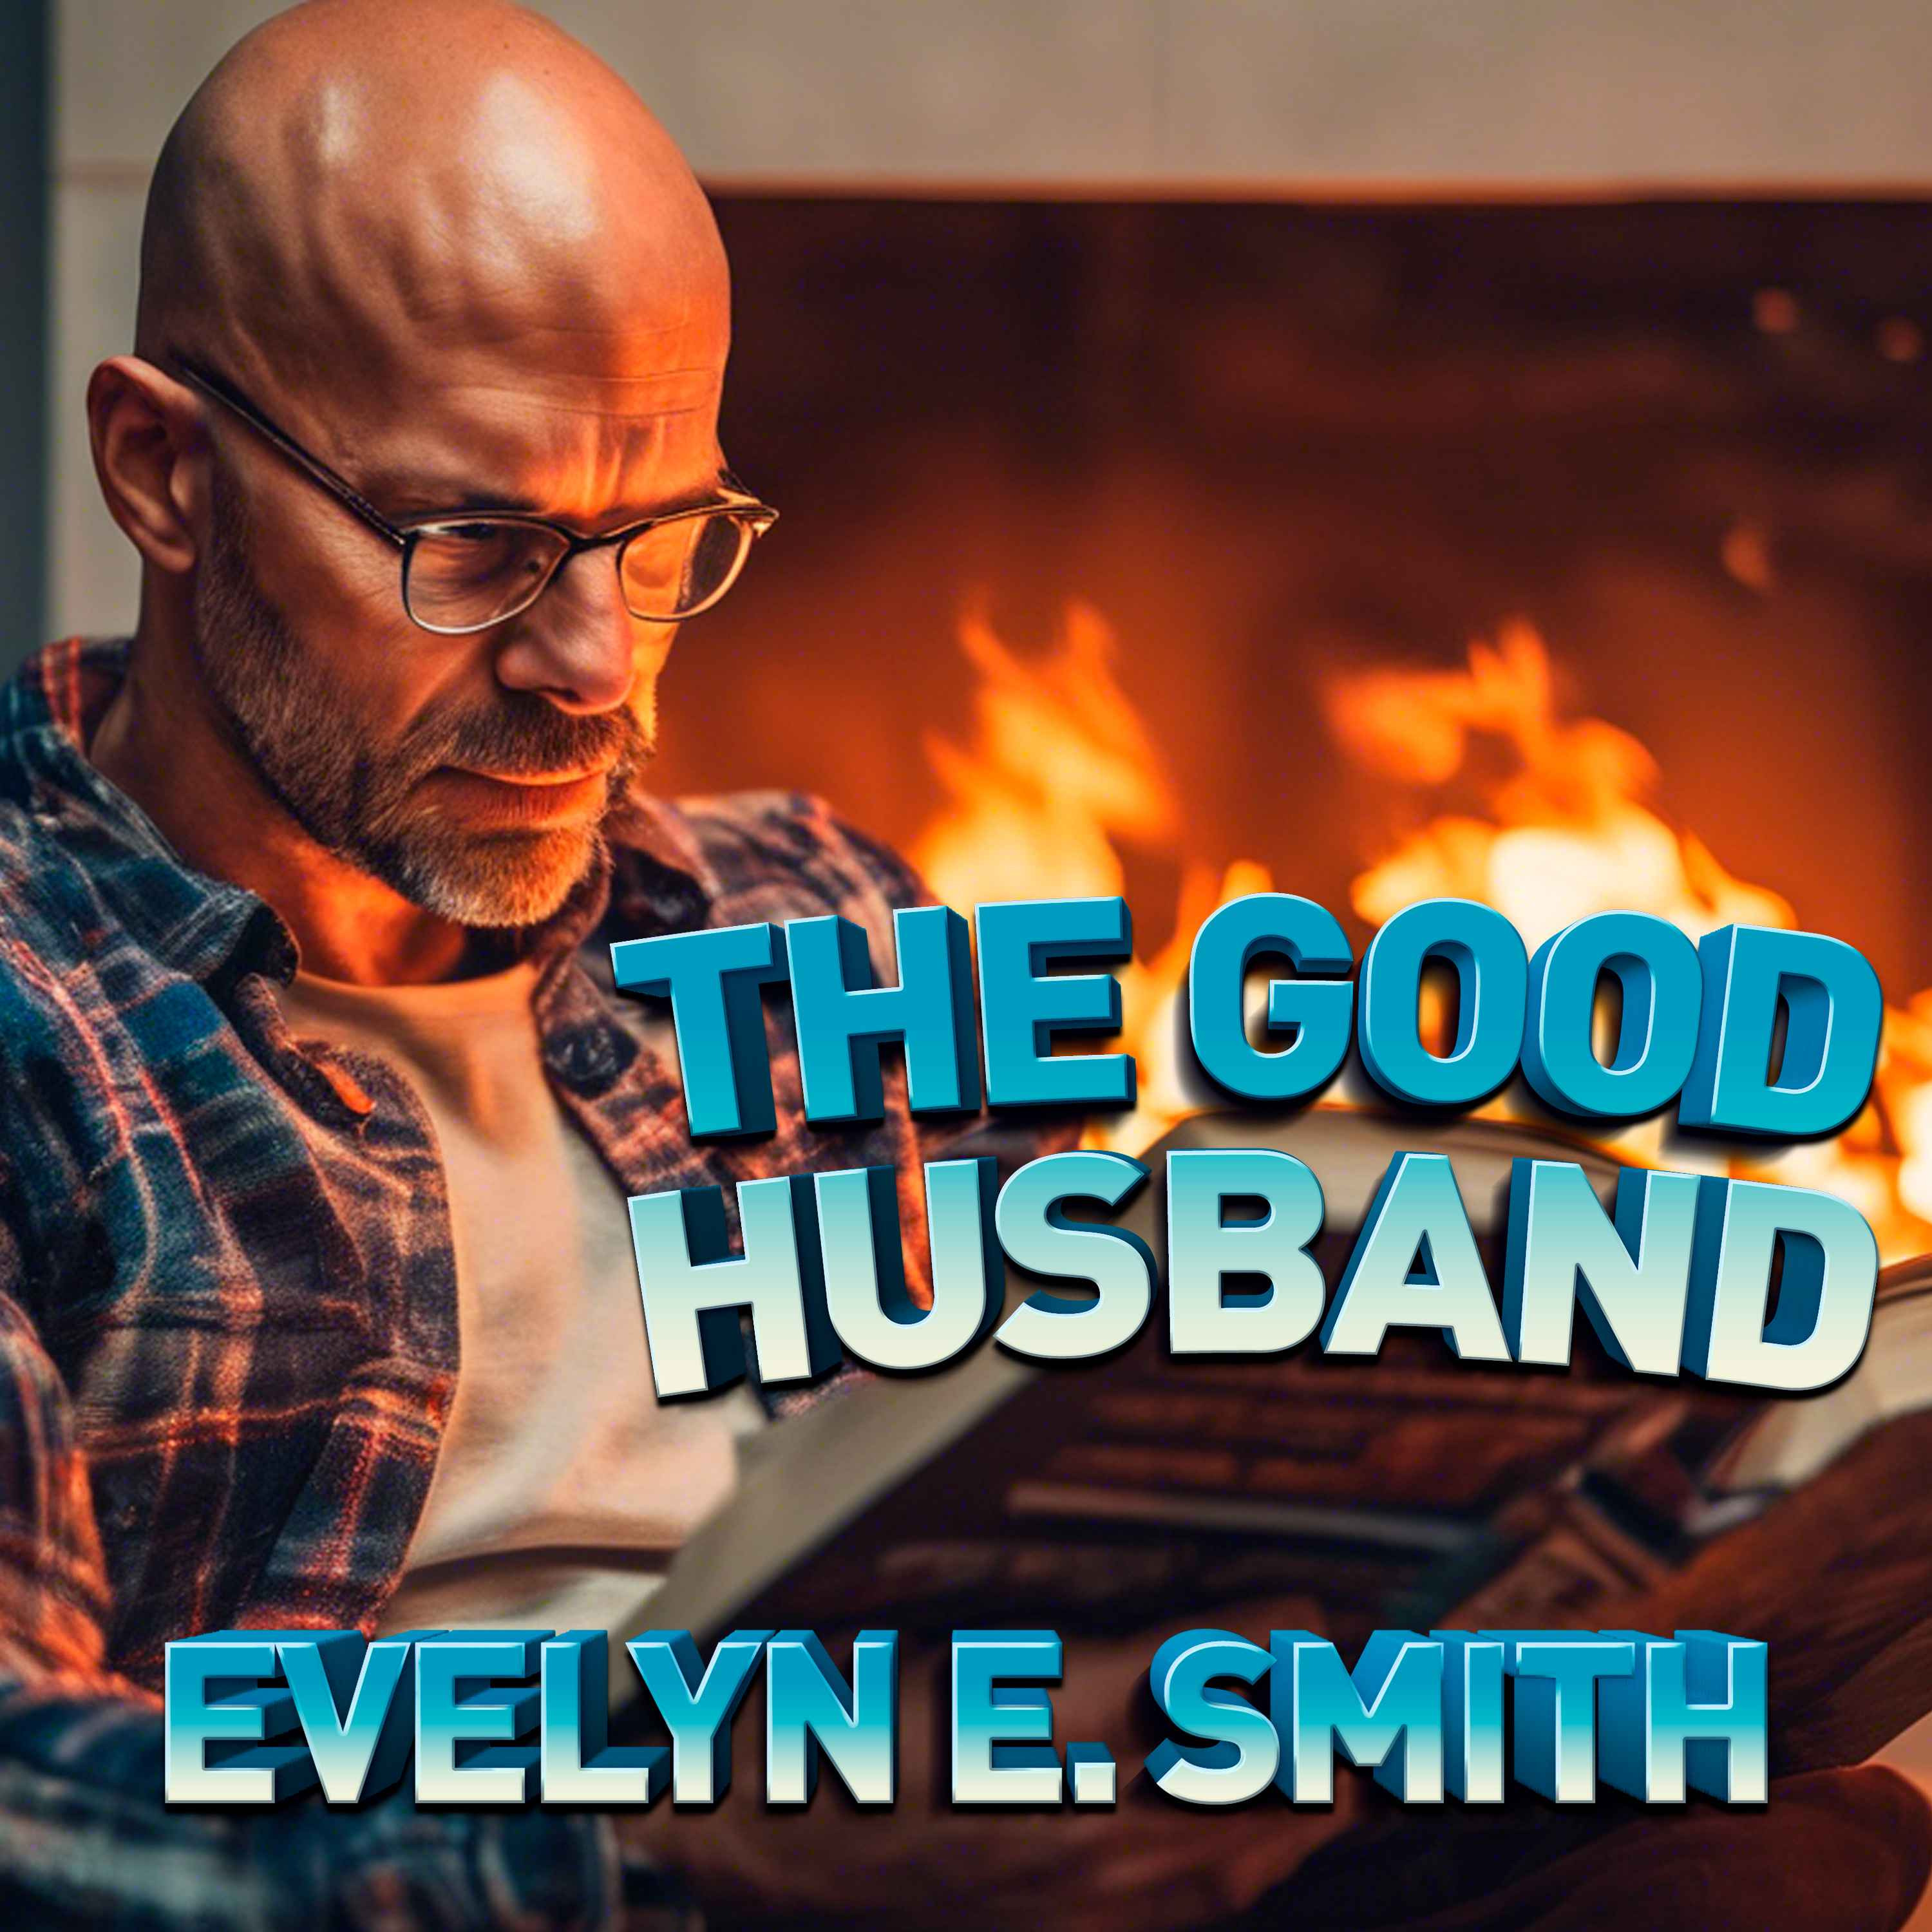 The Good Husband by Evelyn E. Smith - Sci Fi Short Stories From the 1950s